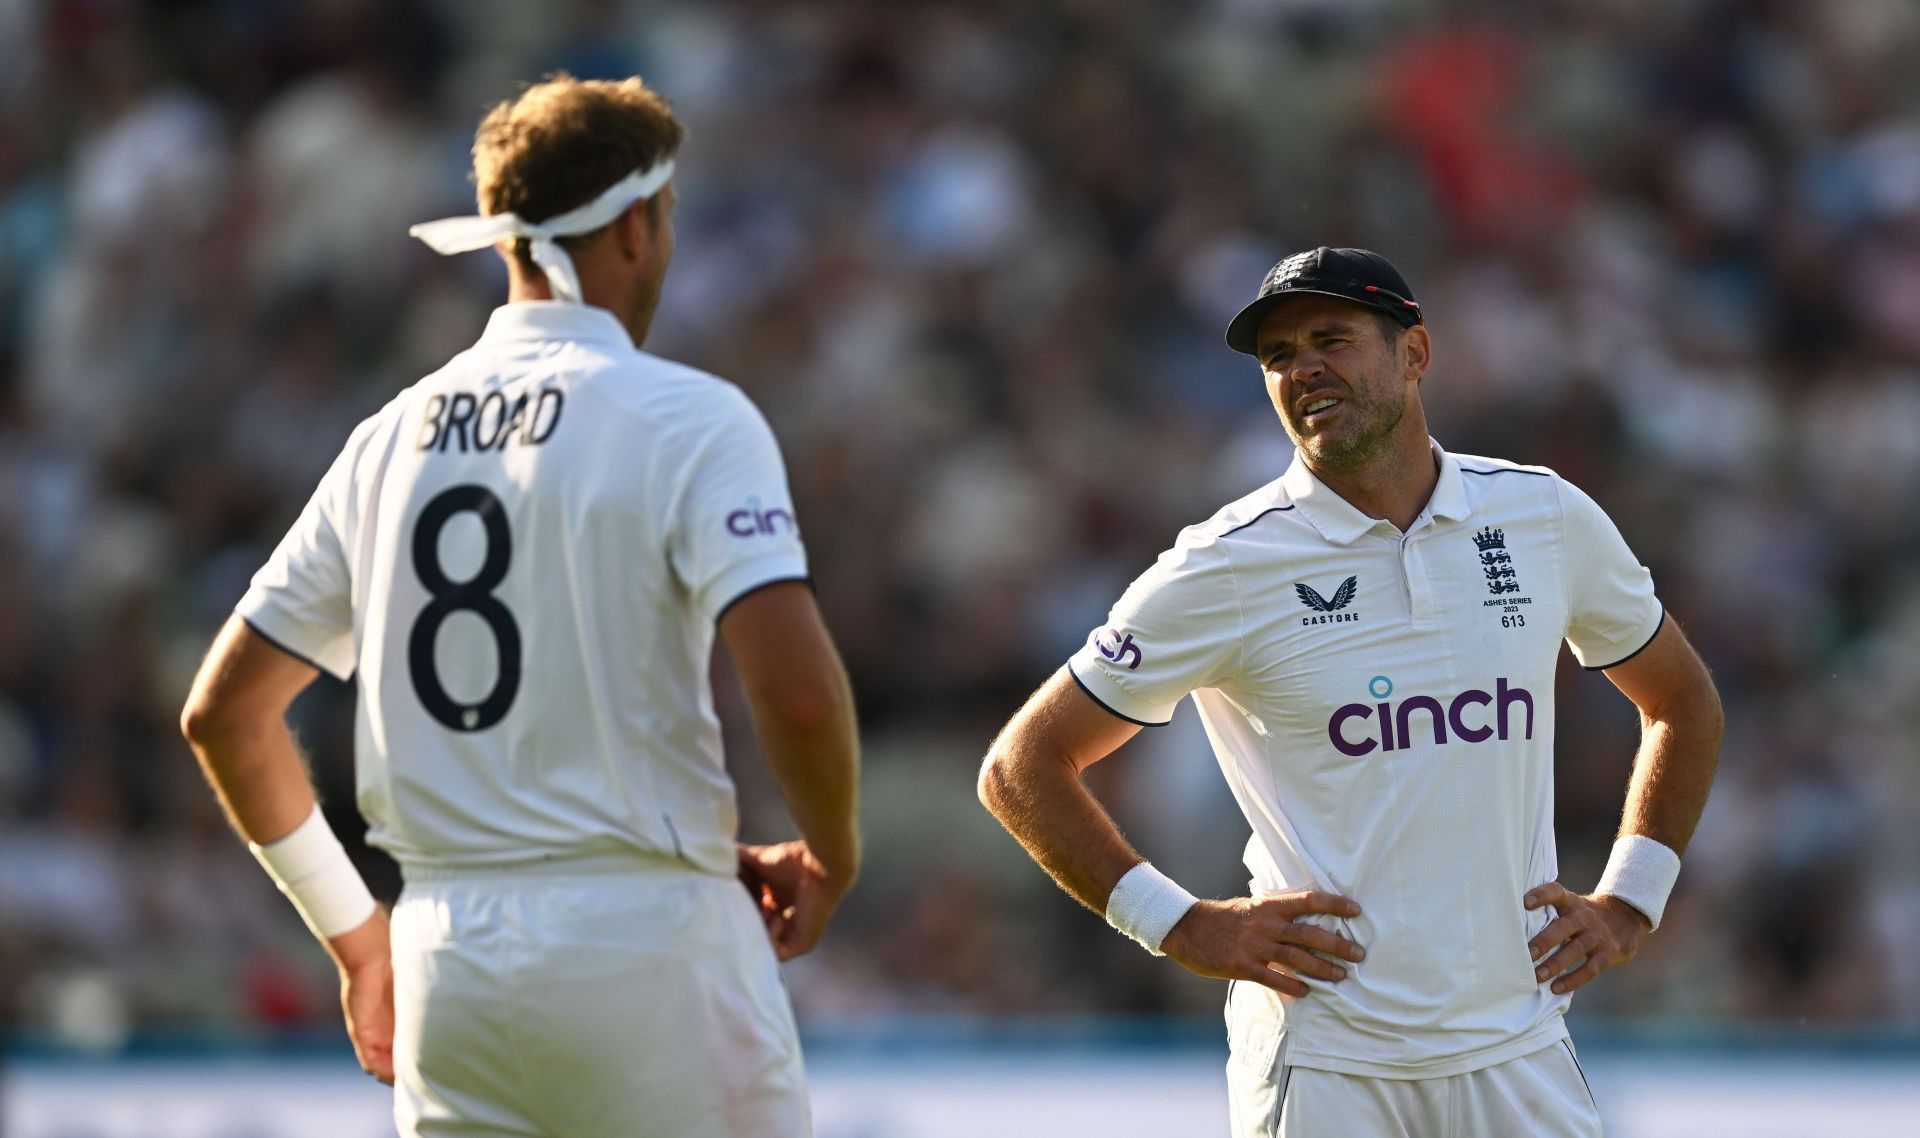 Anderson and Broad have 1274 Test wickets between them